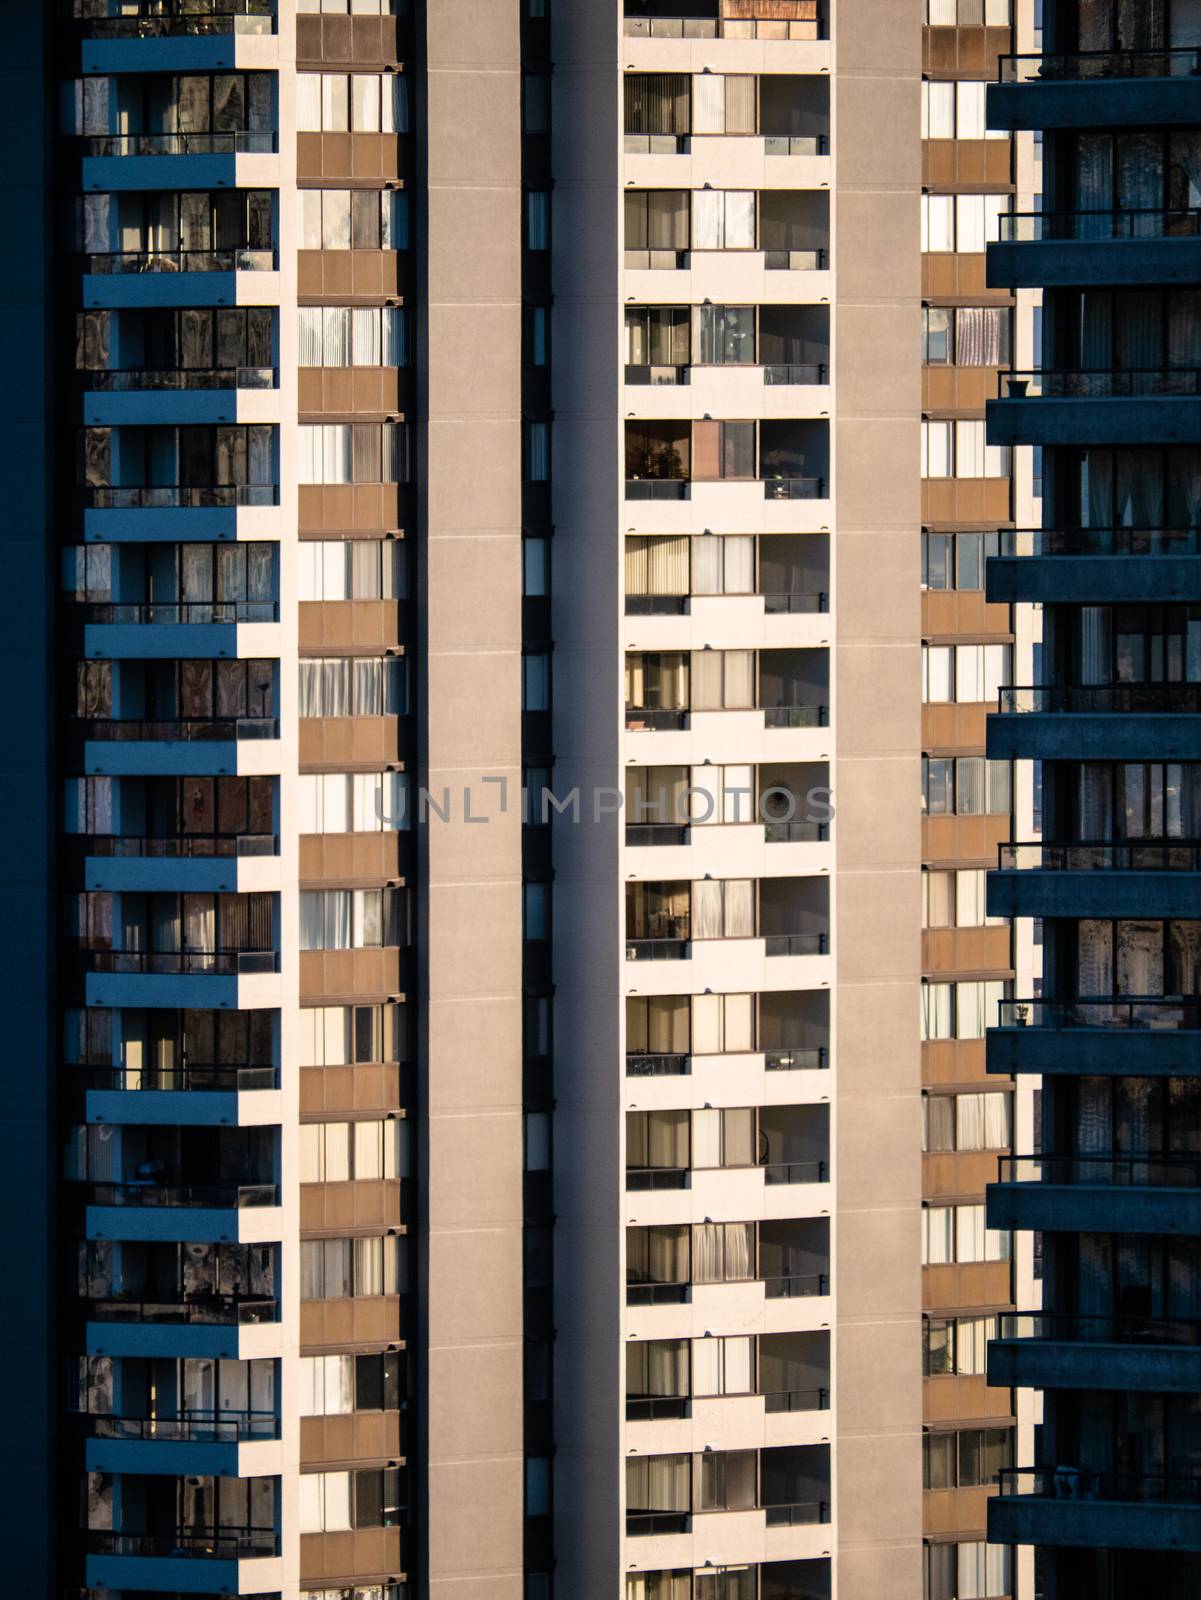 Facade of residential high-rise towers on bright sunny day by Imagenet